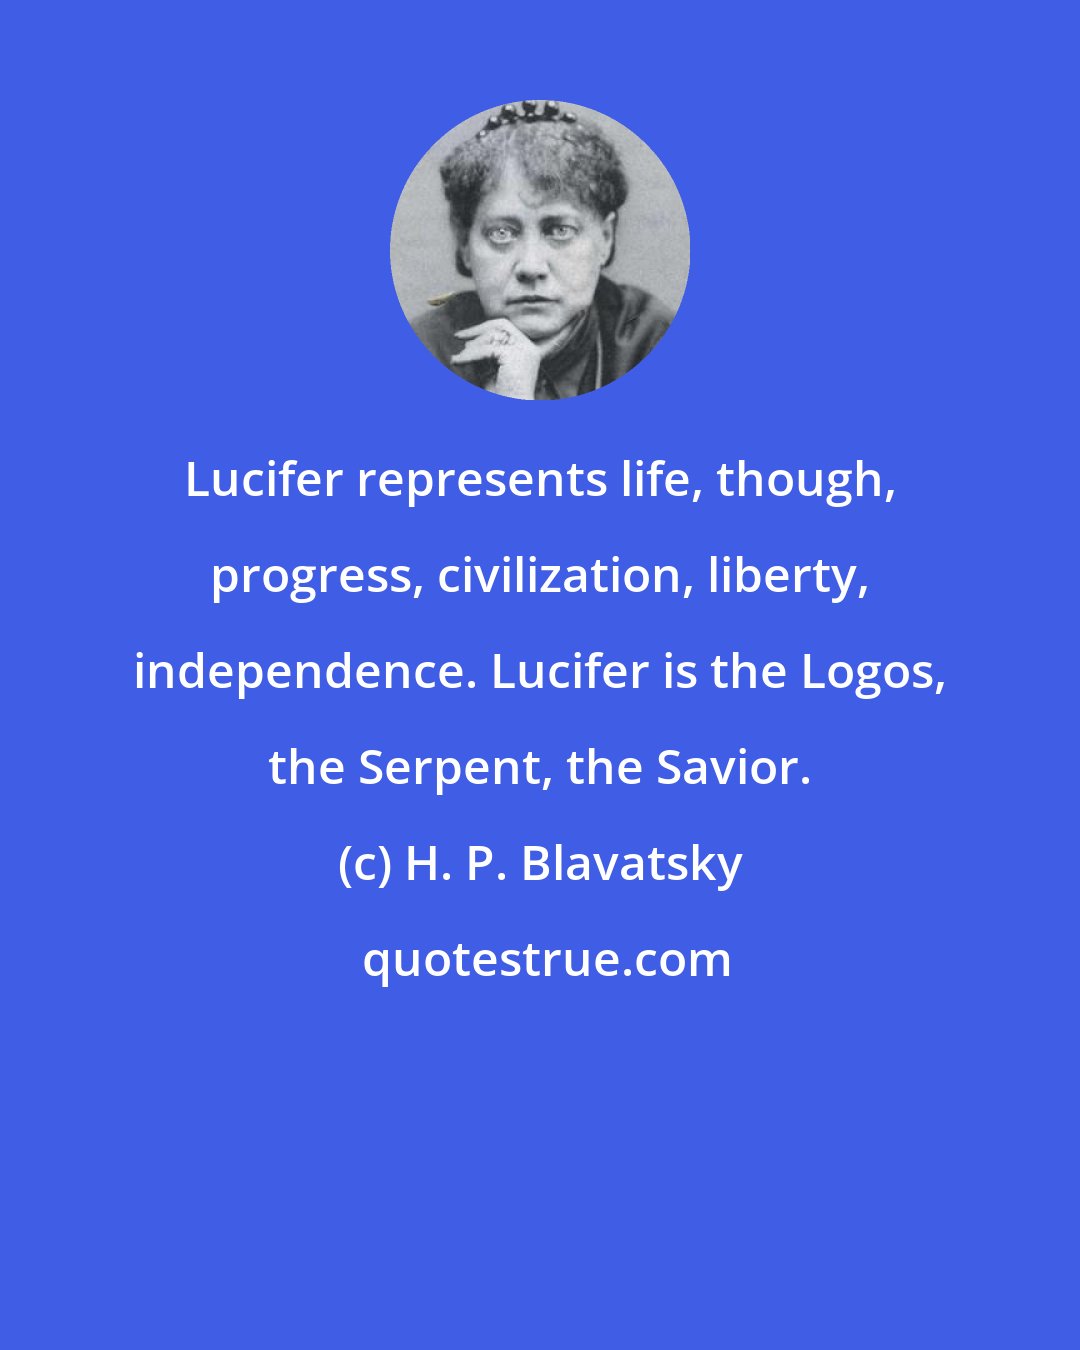 H. P. Blavatsky: Lucifer represents life, though, progress, civilization, liberty, independence. Lucifer is the Logos, the Serpent, the Savior.